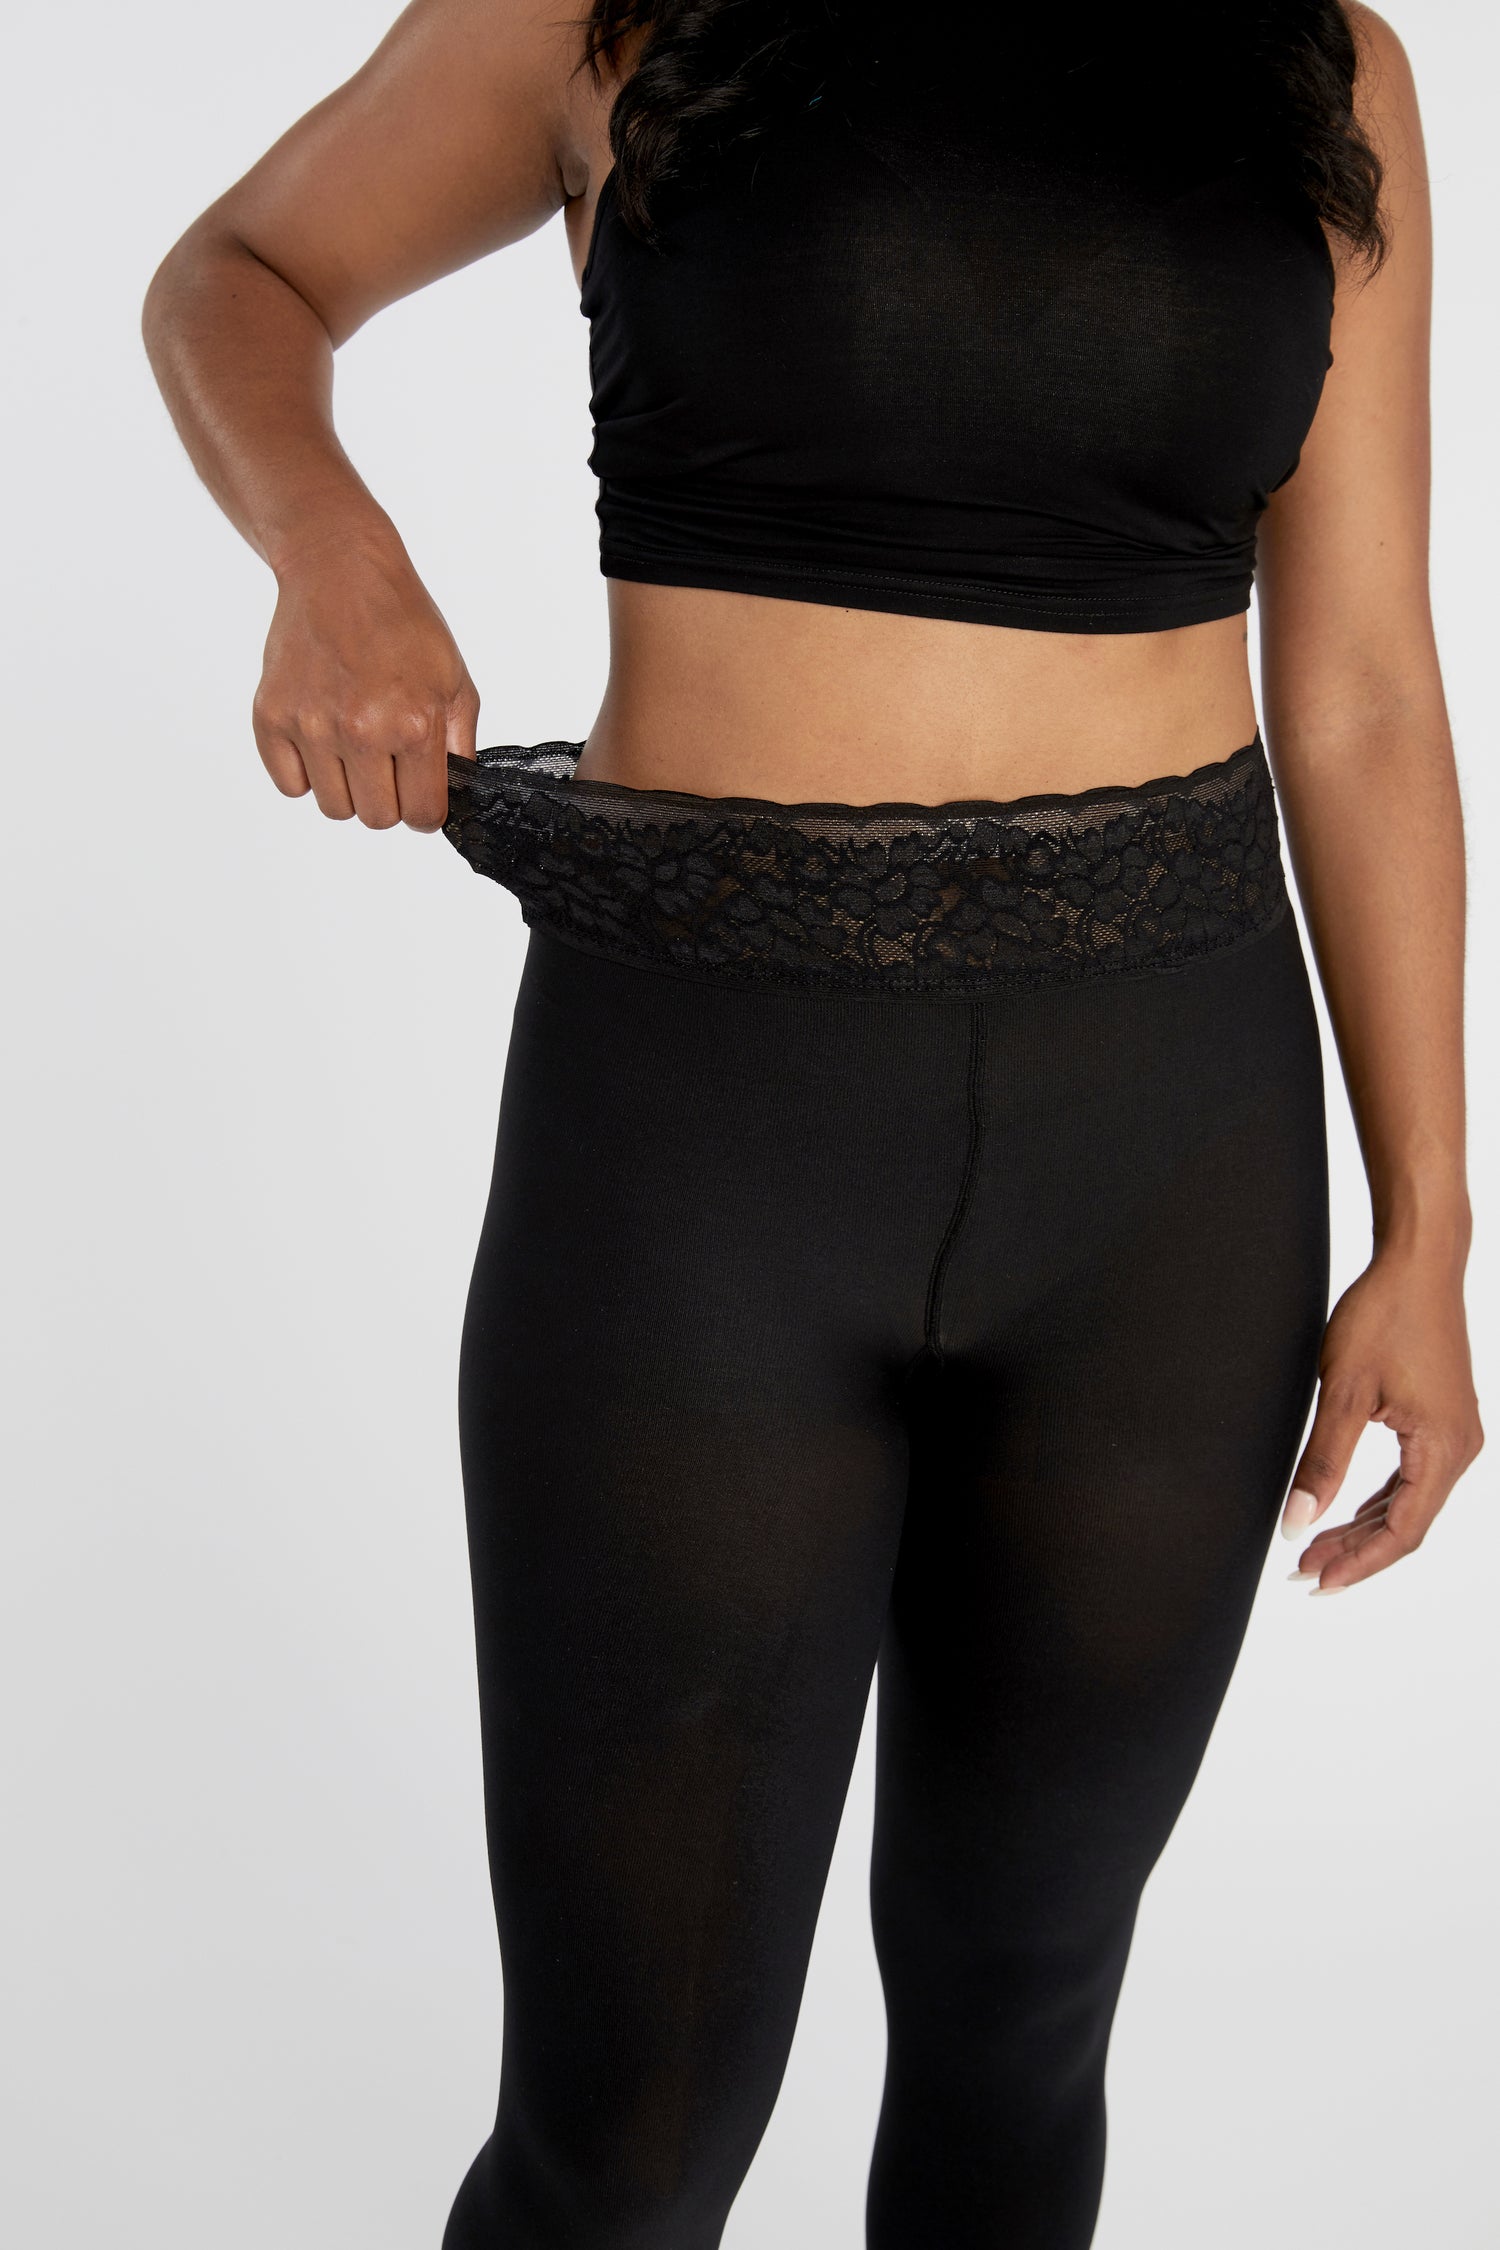 Womens Leggings | Best Solid Black Leggings | Yoga Pants | Footless Tights  | Yoga Waistband |$10 With Order